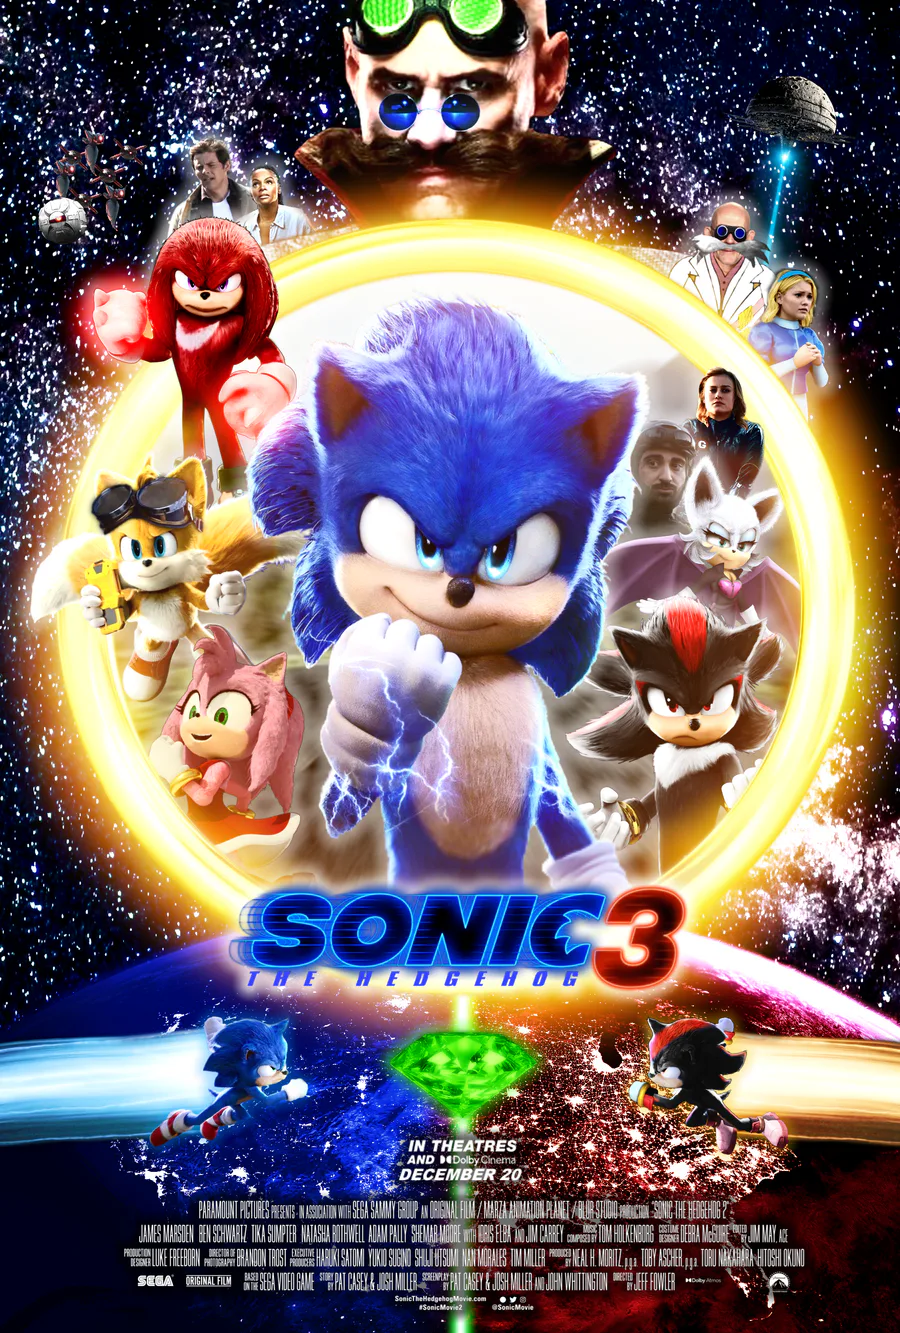 sonic 3 classic heroes by superGuamer - Game Jolt